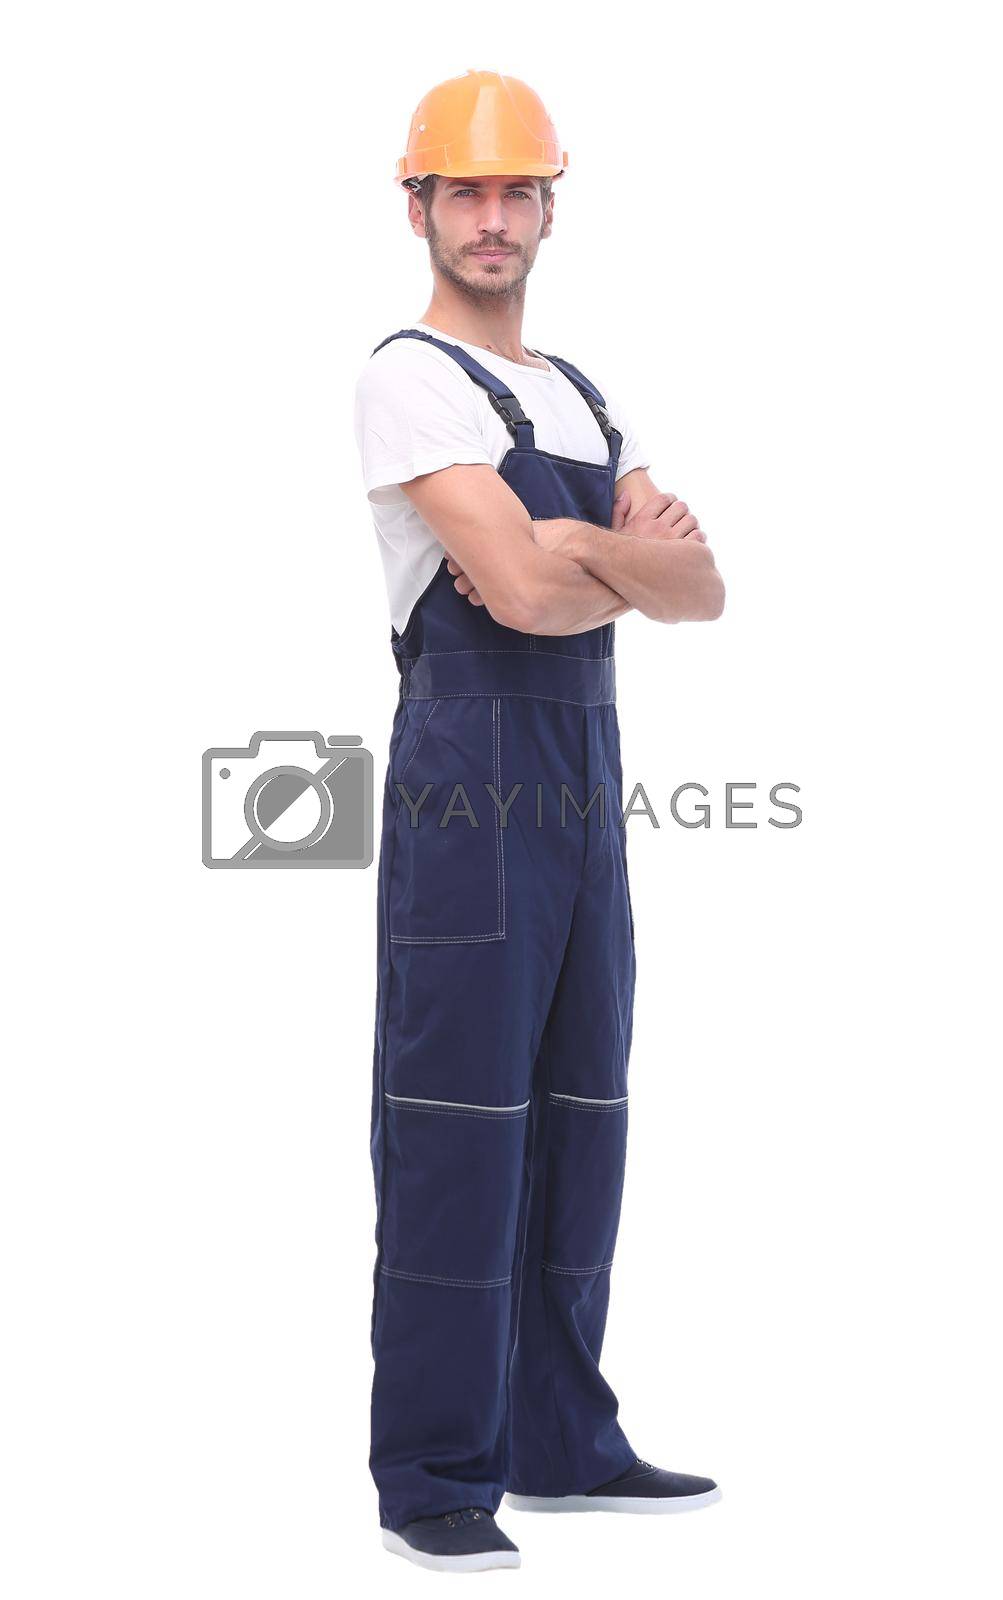 Royalty free image of in full growth. confident man wearing overalls and a crash helmet. by asdf